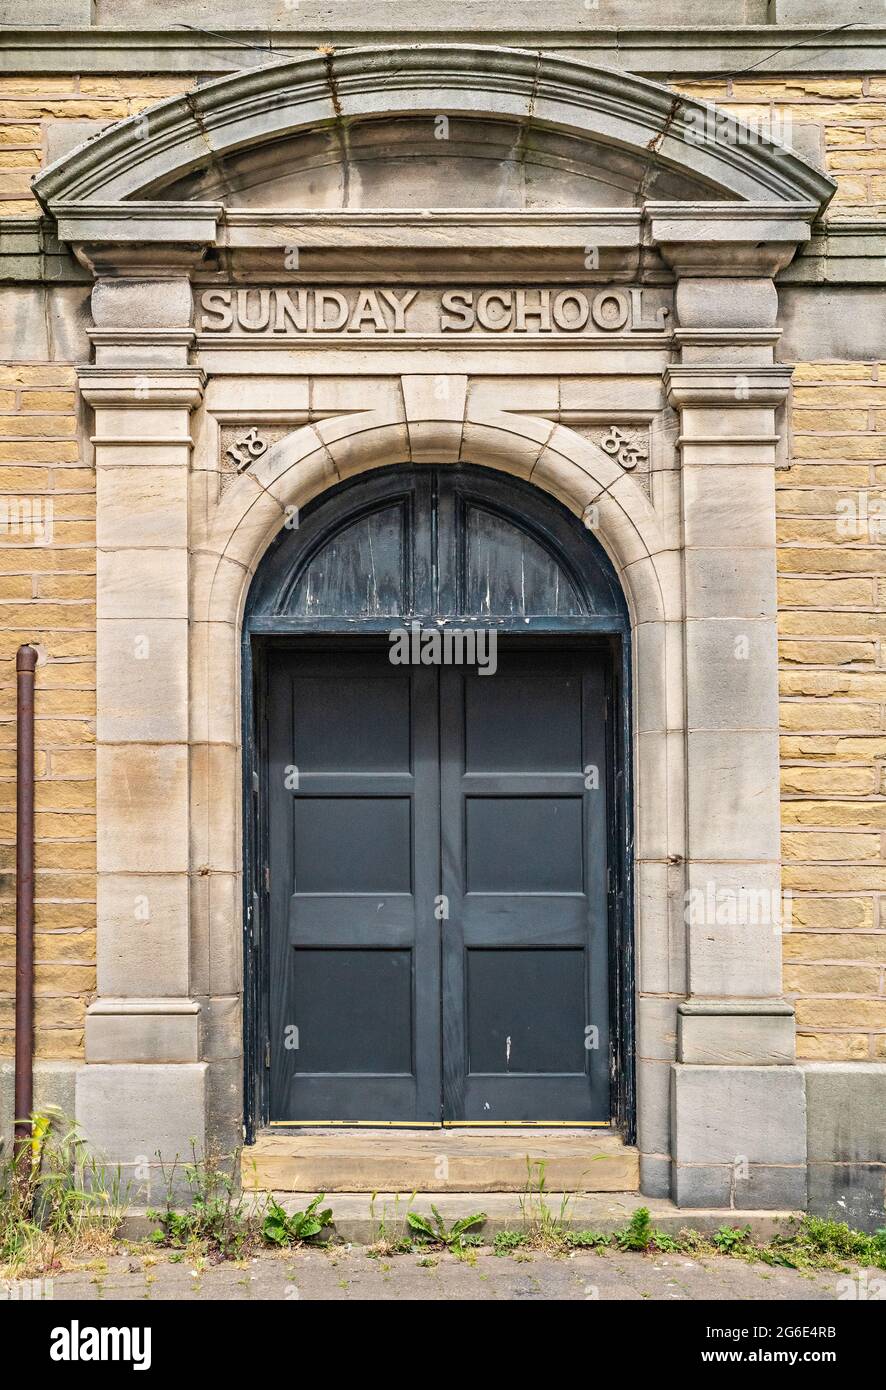 Entrance doorway to Sunday School building in Poulton le Sands, Morecambe Stock Photo